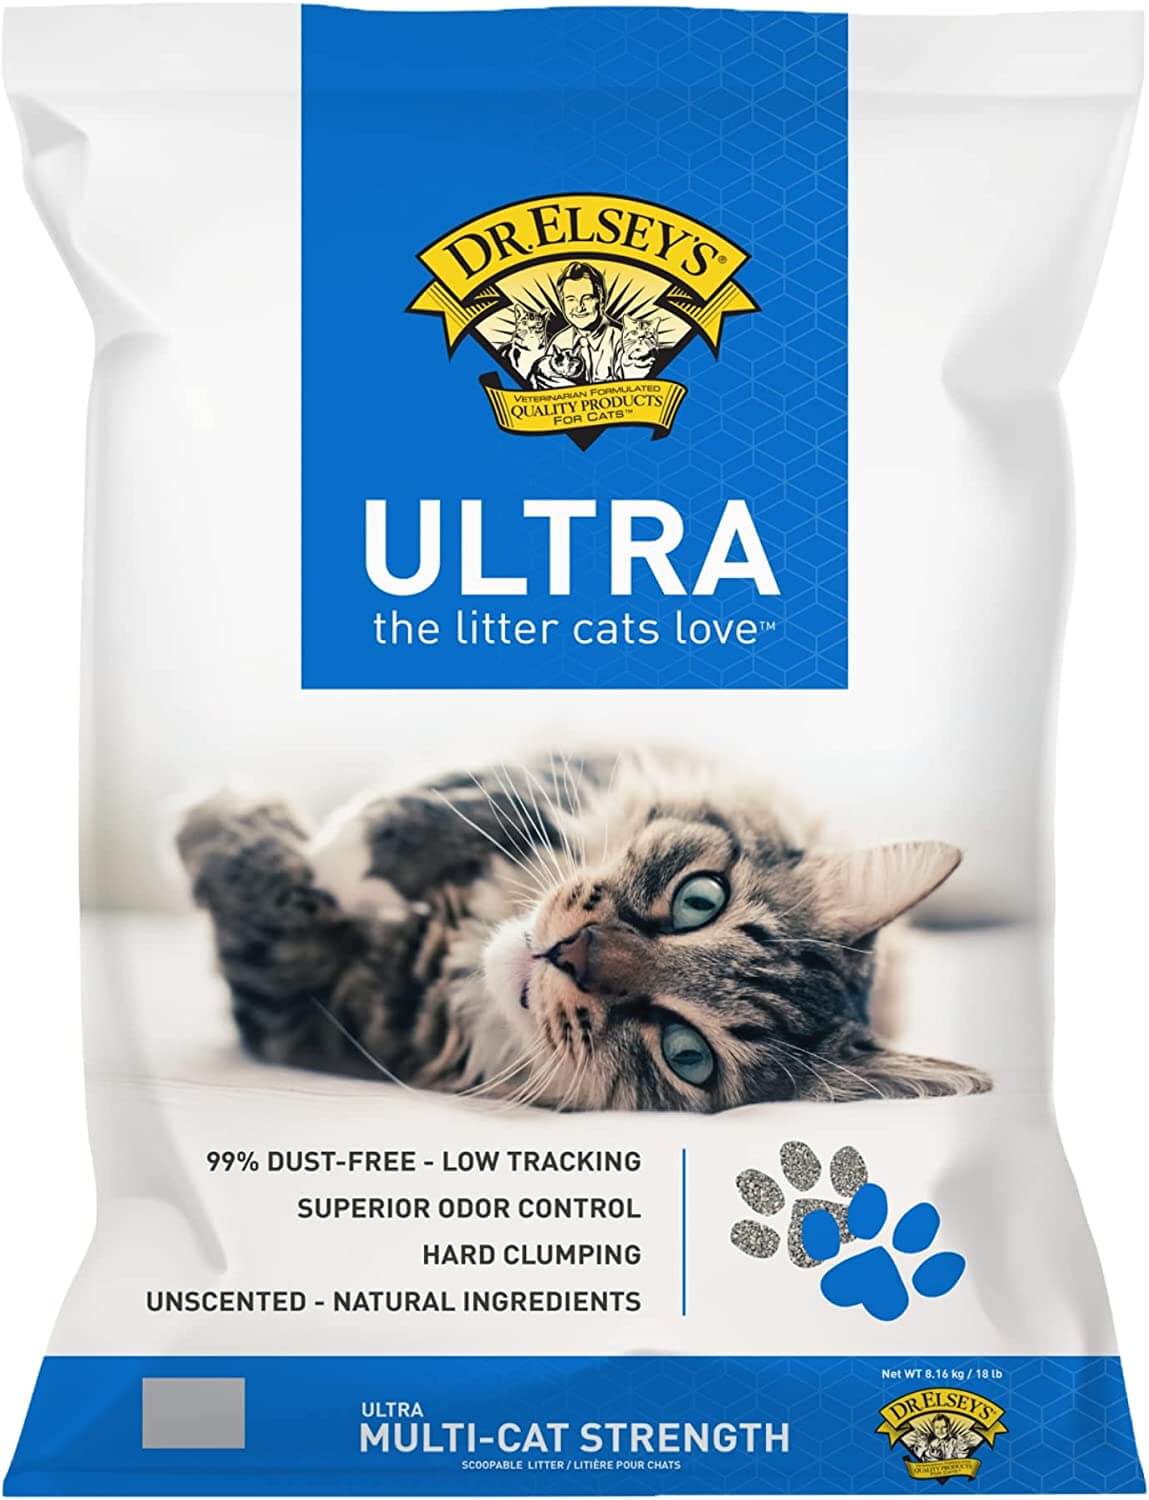 white and blue bag of cat litter